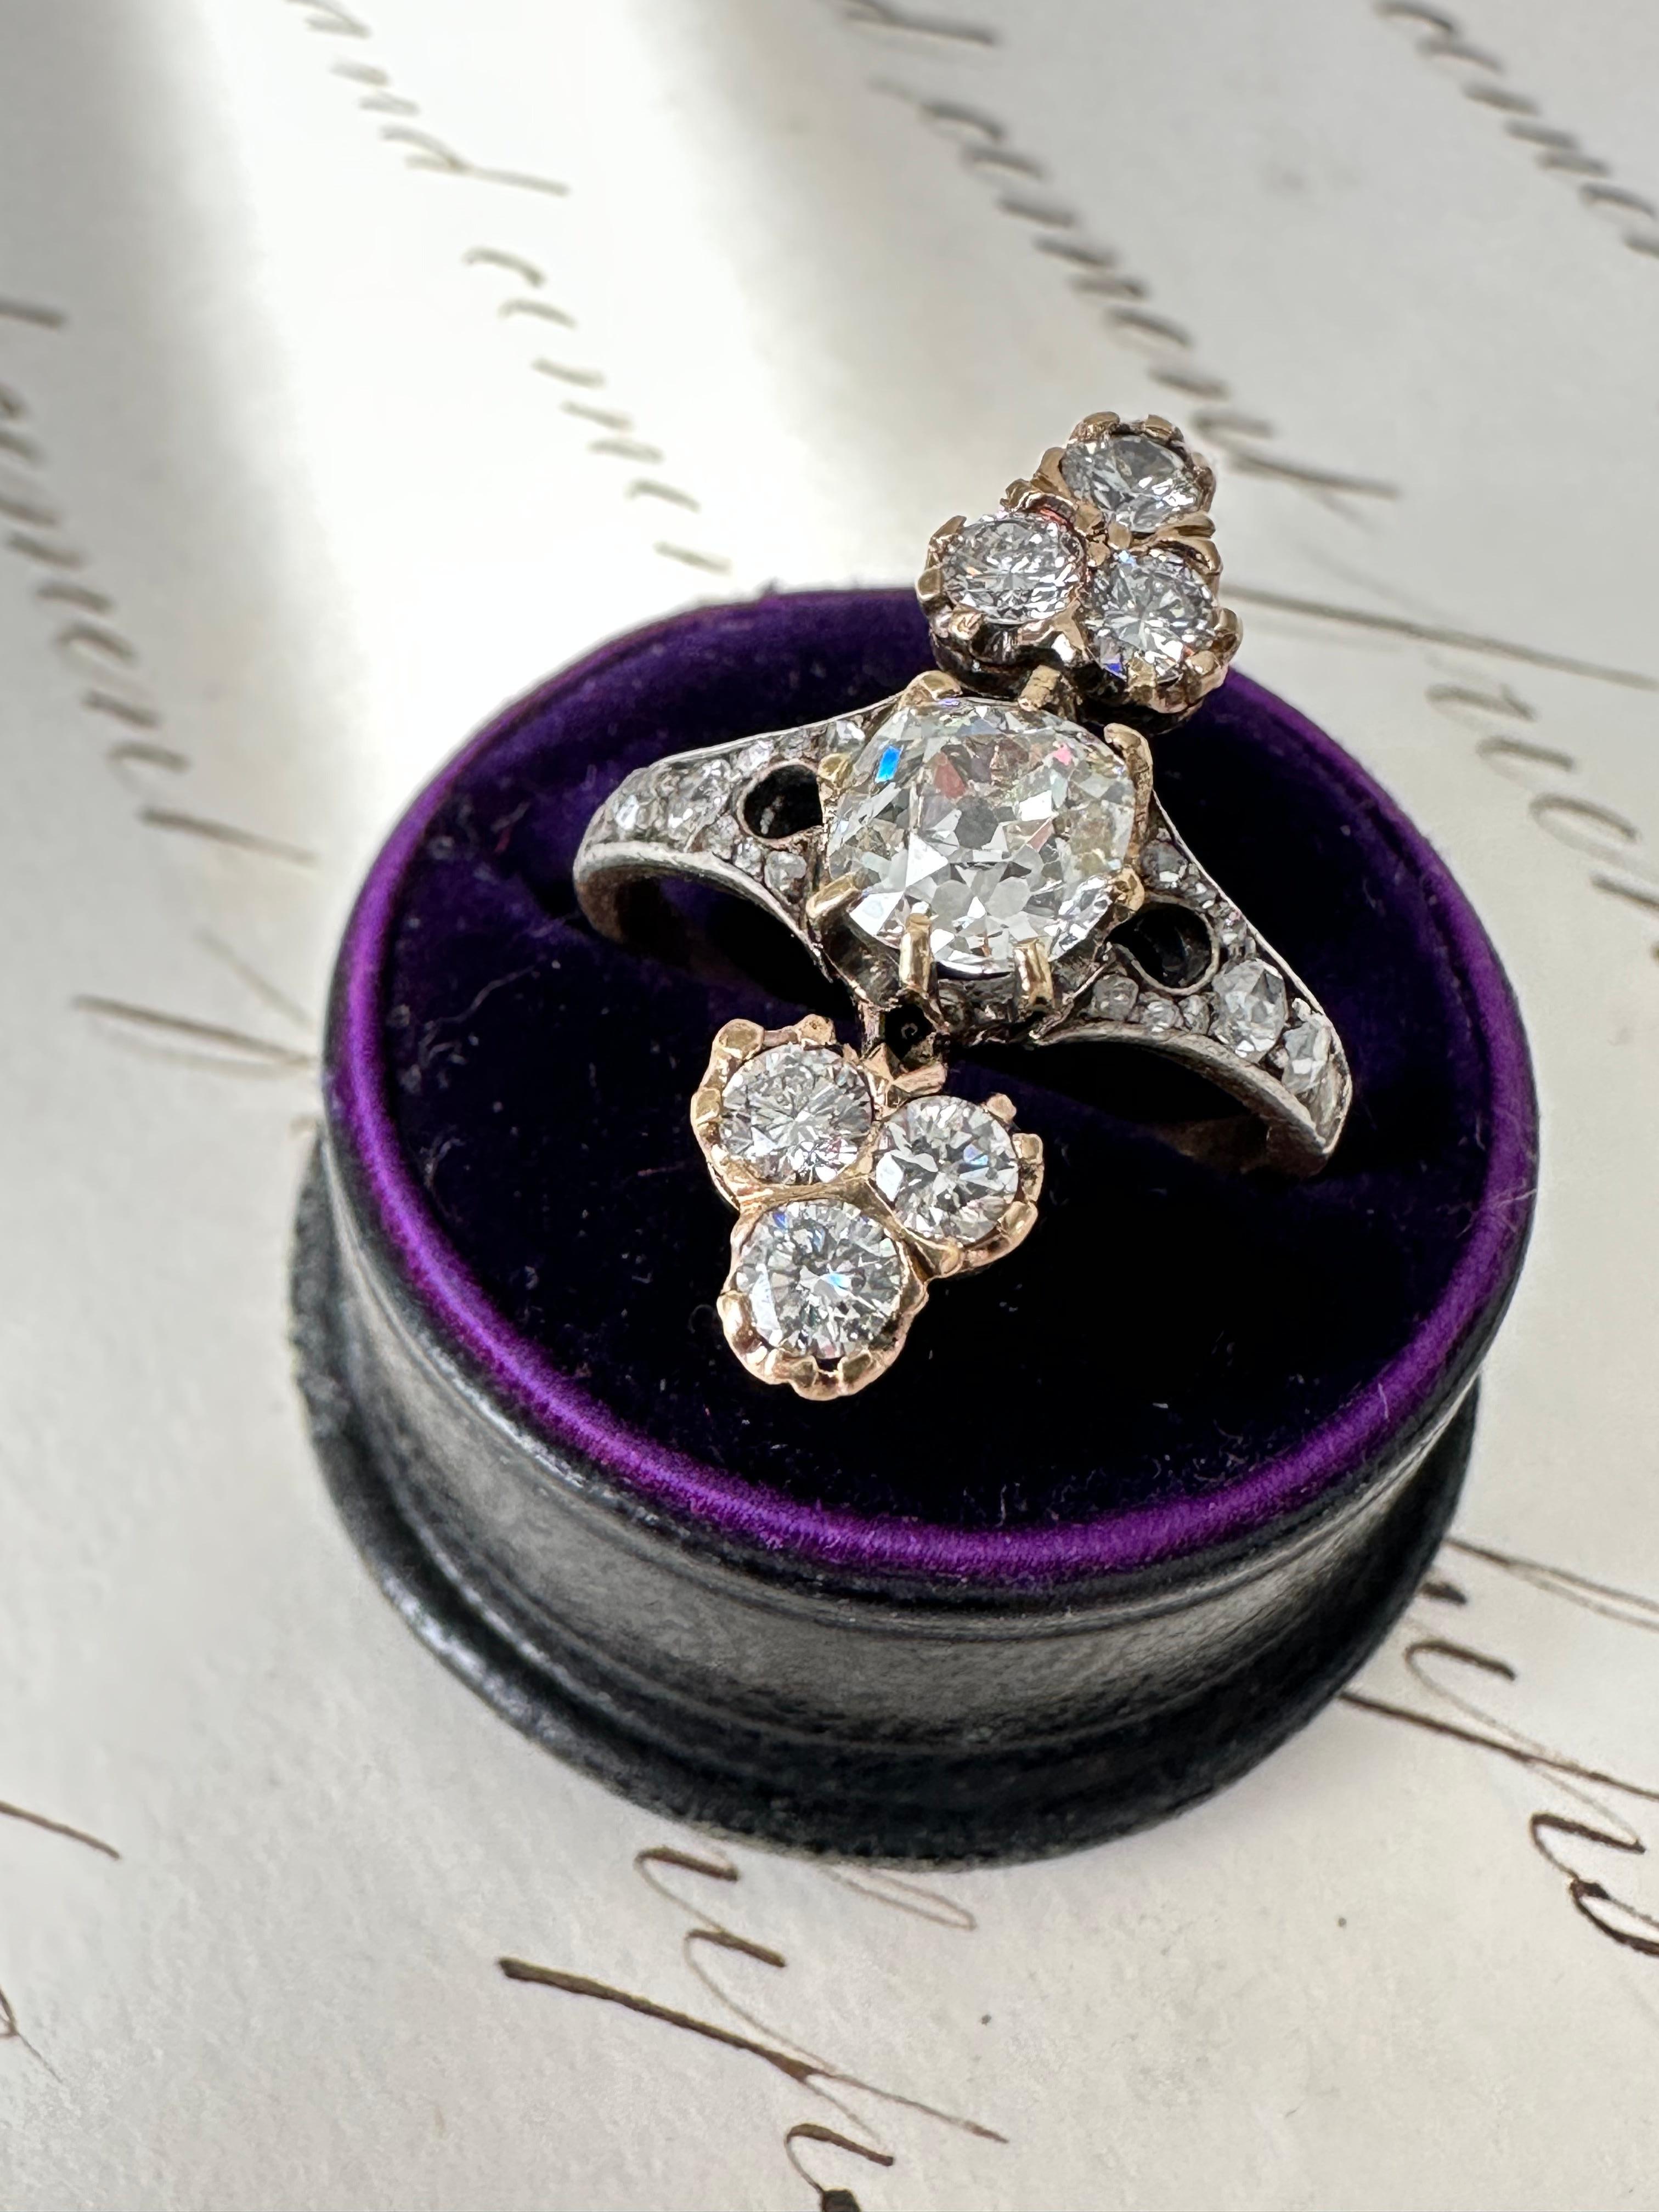 This captivating Edwardian era ring centers on a shimmering .80 carat old mine-cut diamond that displays a phenomenon called the kozibe effect. This means that when the diamond is face-up, the culet reflects in the crown facets, adding charm and